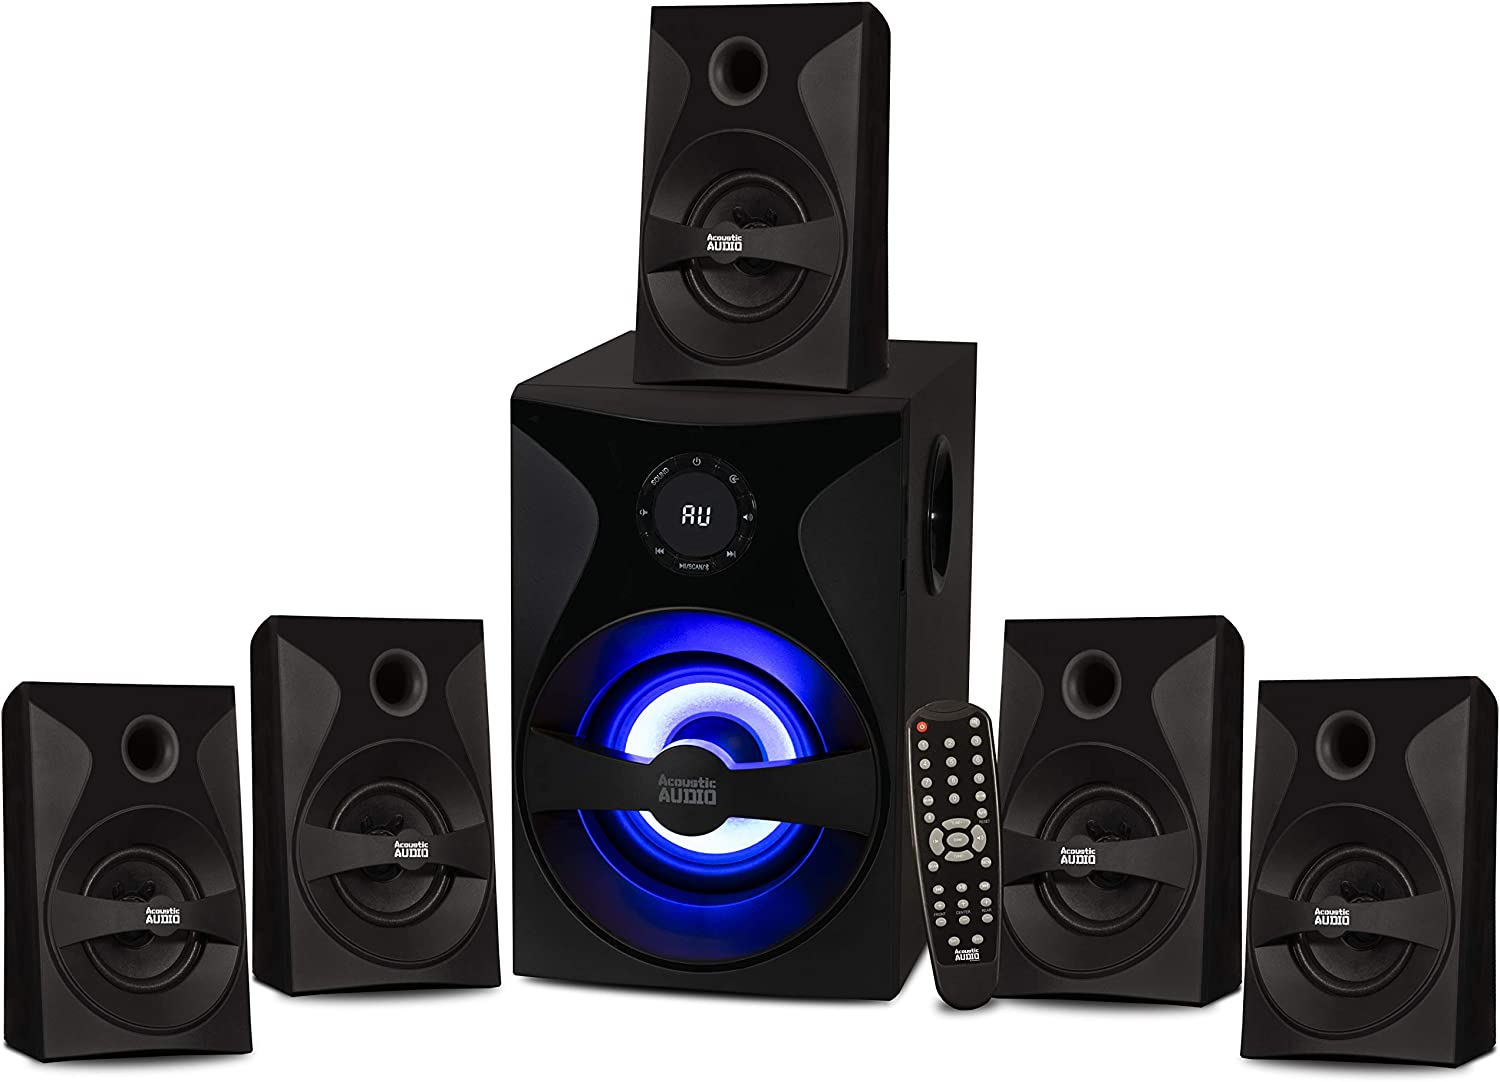 Acoustic Audio by Goldwood Bluetooth 5.1 Surround Sound System with LED Light Display, FM Tuner, USB and SD Card Inputs – 6-Piece Home Theater Speaker Set, Includes Remote Control – AA5400 Black